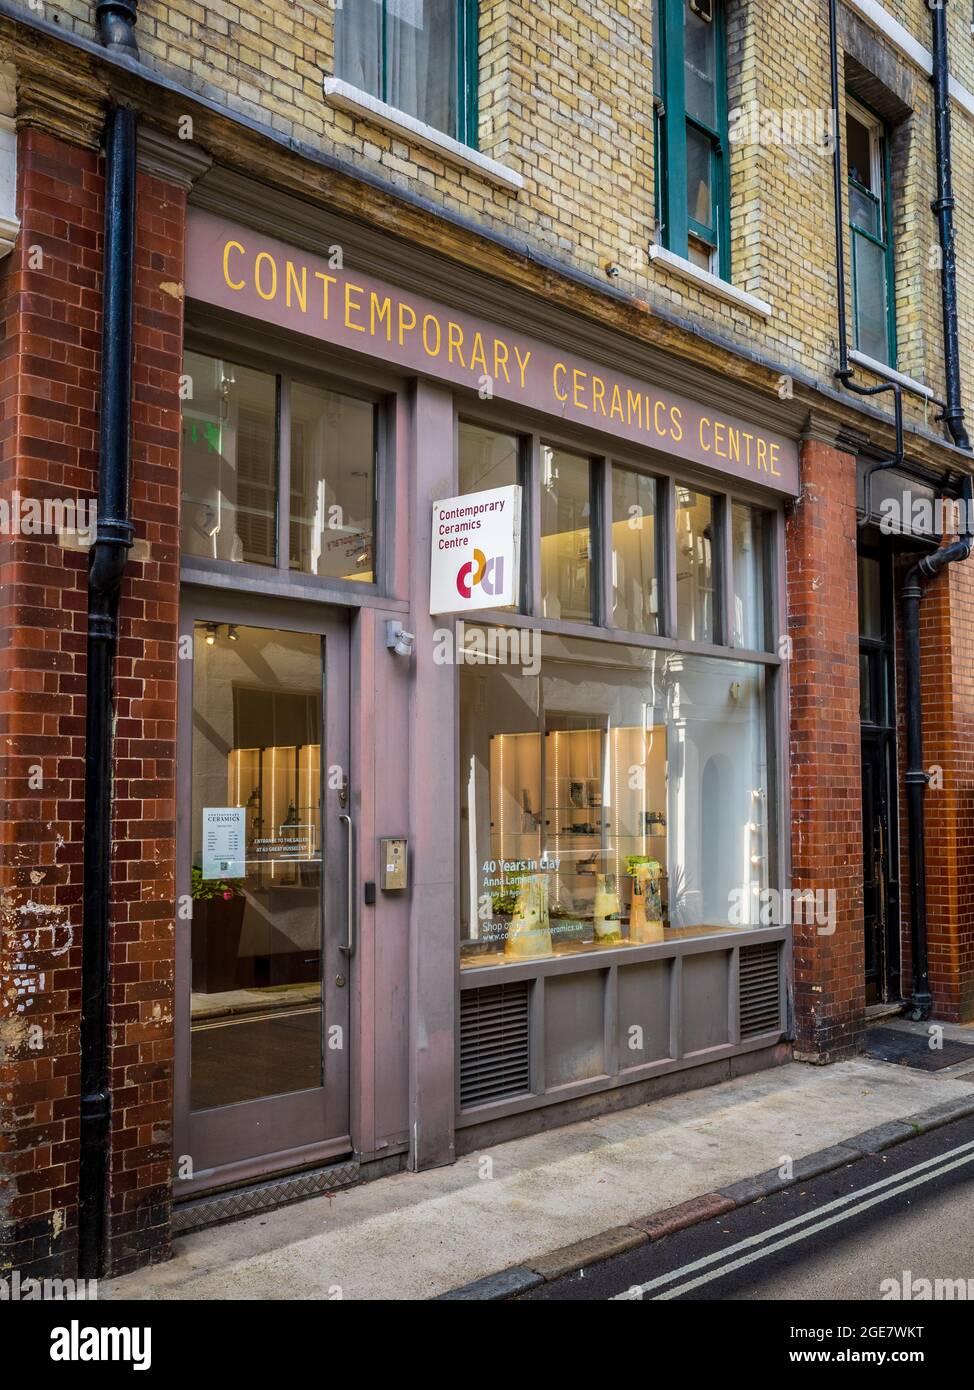 Contemporary Ceramics Centre London - modern gallery displaying  studio ceramics by members of Craft Potters Association. At 63 Great Russell St. Stock Photo